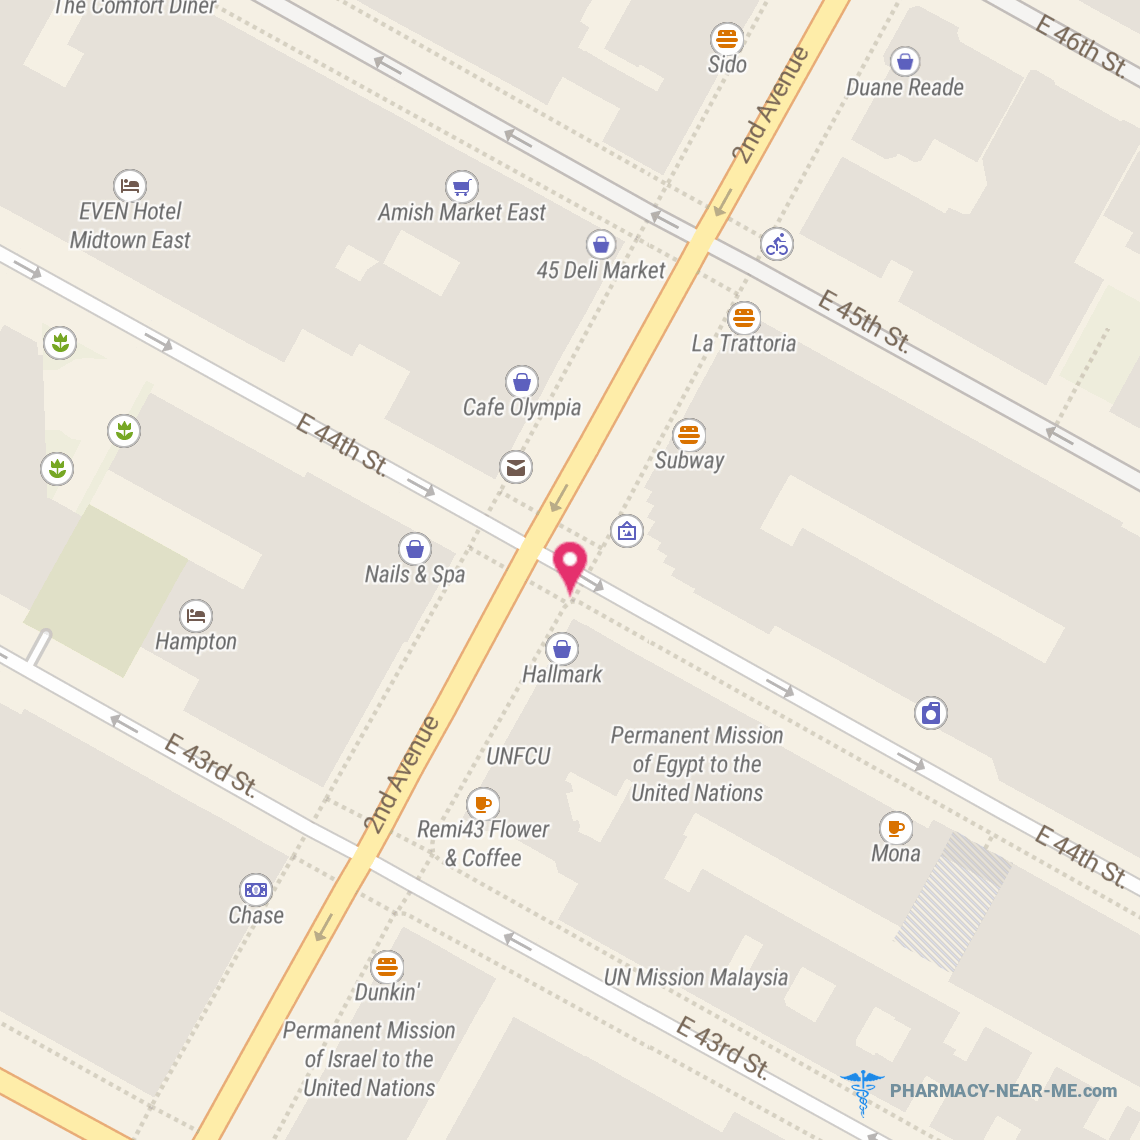 DIPLOMAT CHEMISTS INC - Pharmacy Hours, Phone, Reviews & Information: 800 2nd Avenue, NY, New York 10017, United States